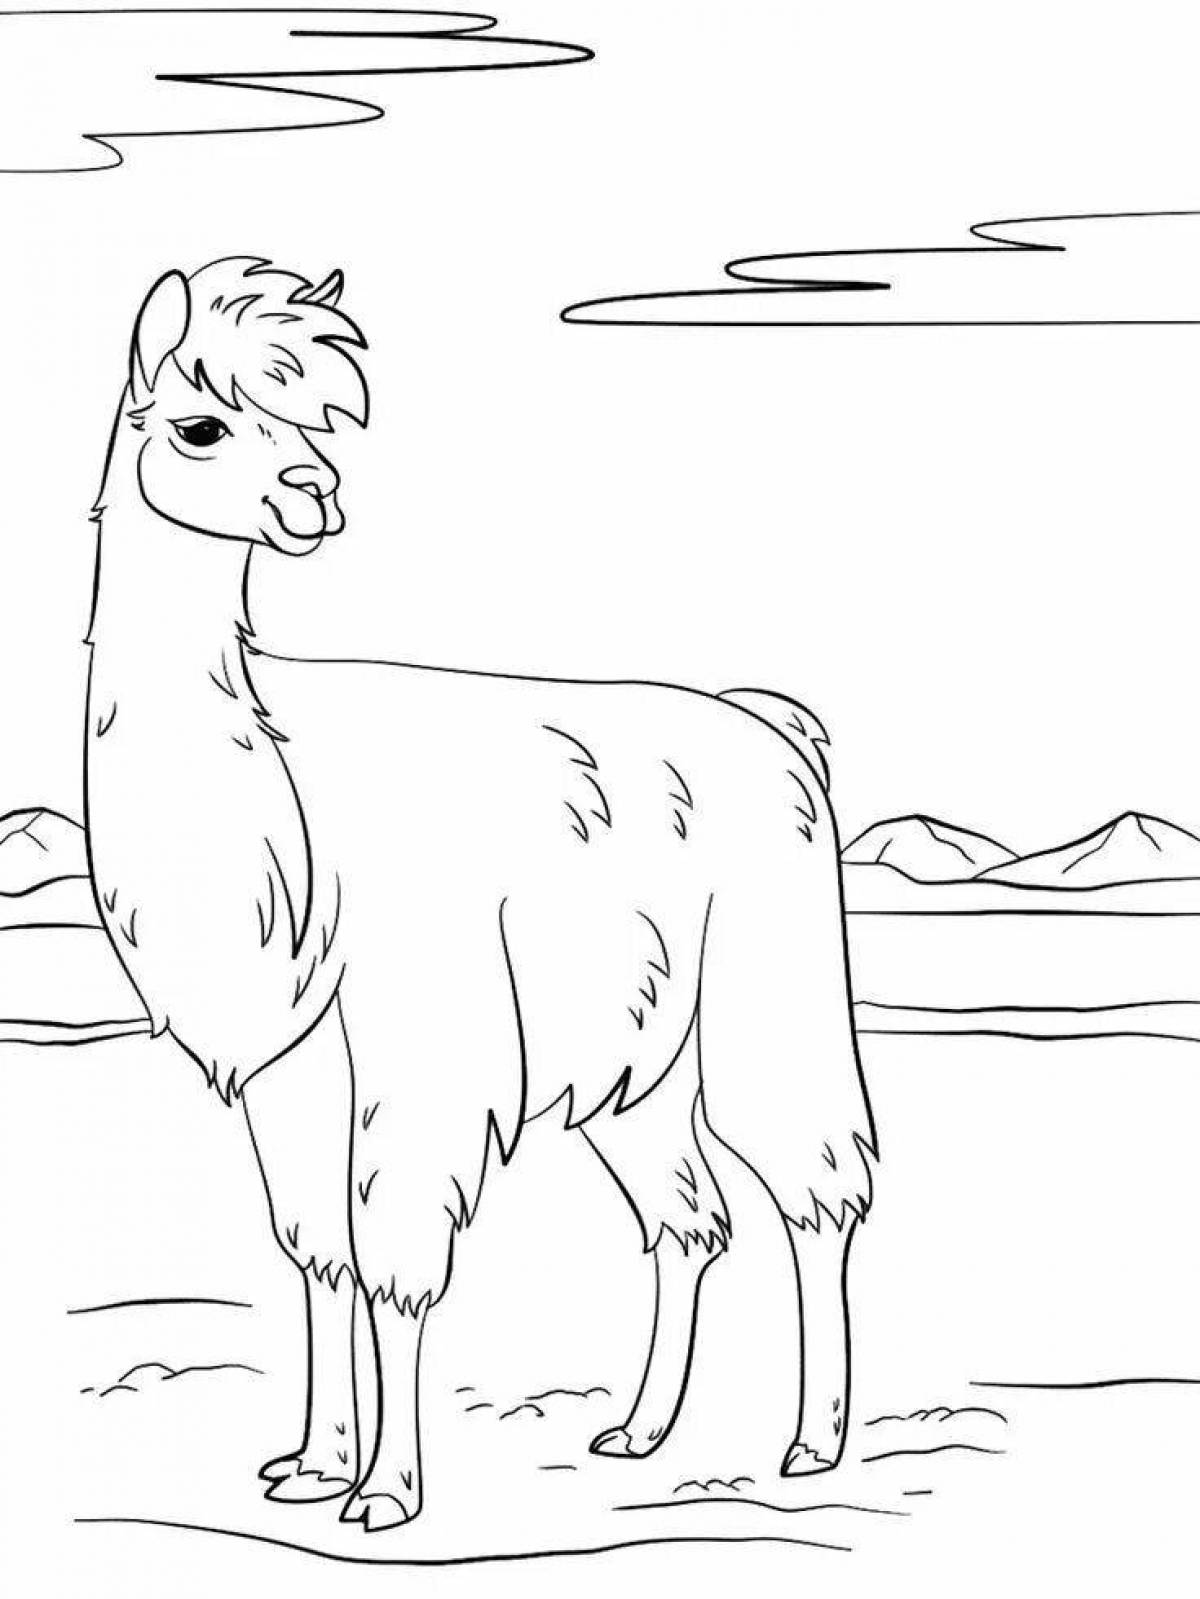 Magic llama coloring pages for kids